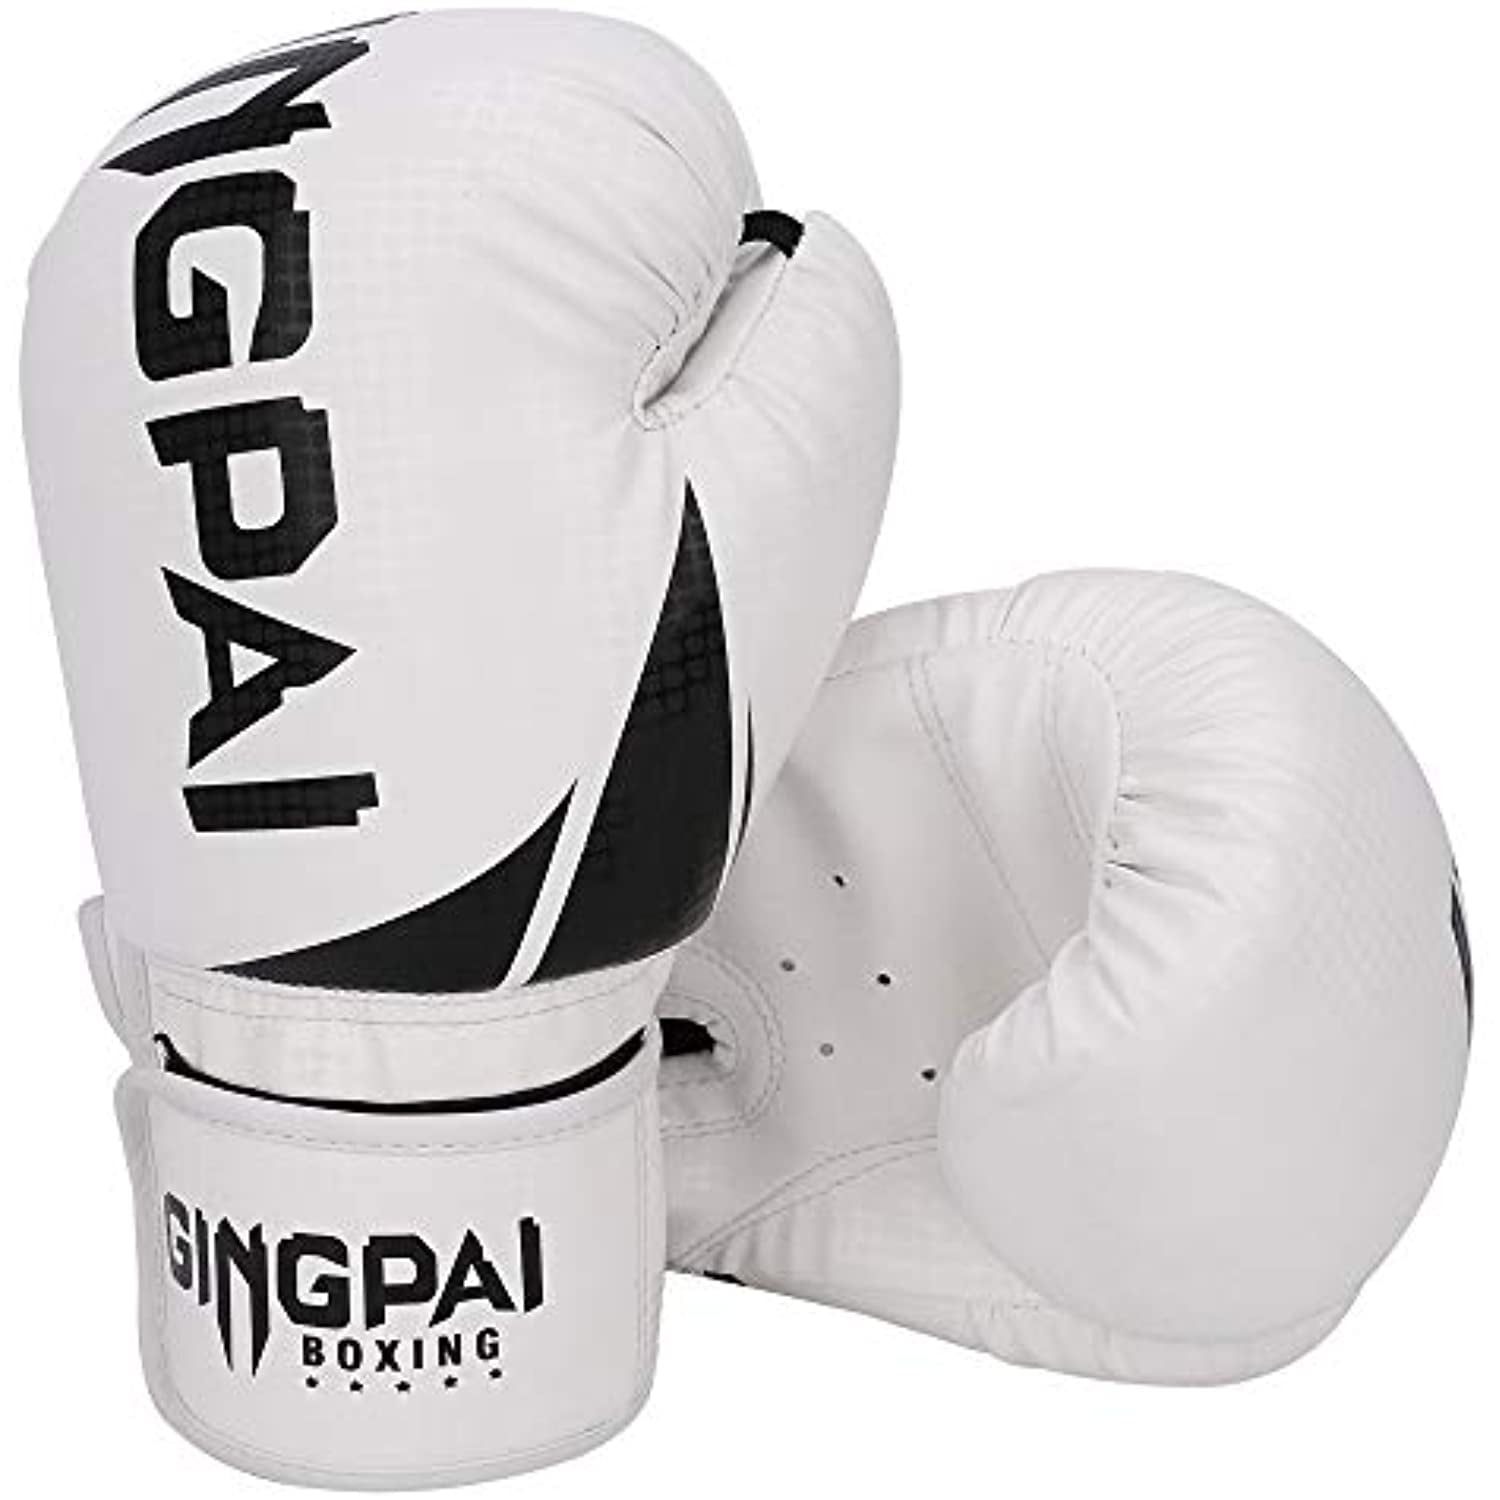 MMA Muay Thai UFC Punching Bag Speed Training Sparring Boxing Gloves Gym Cool 